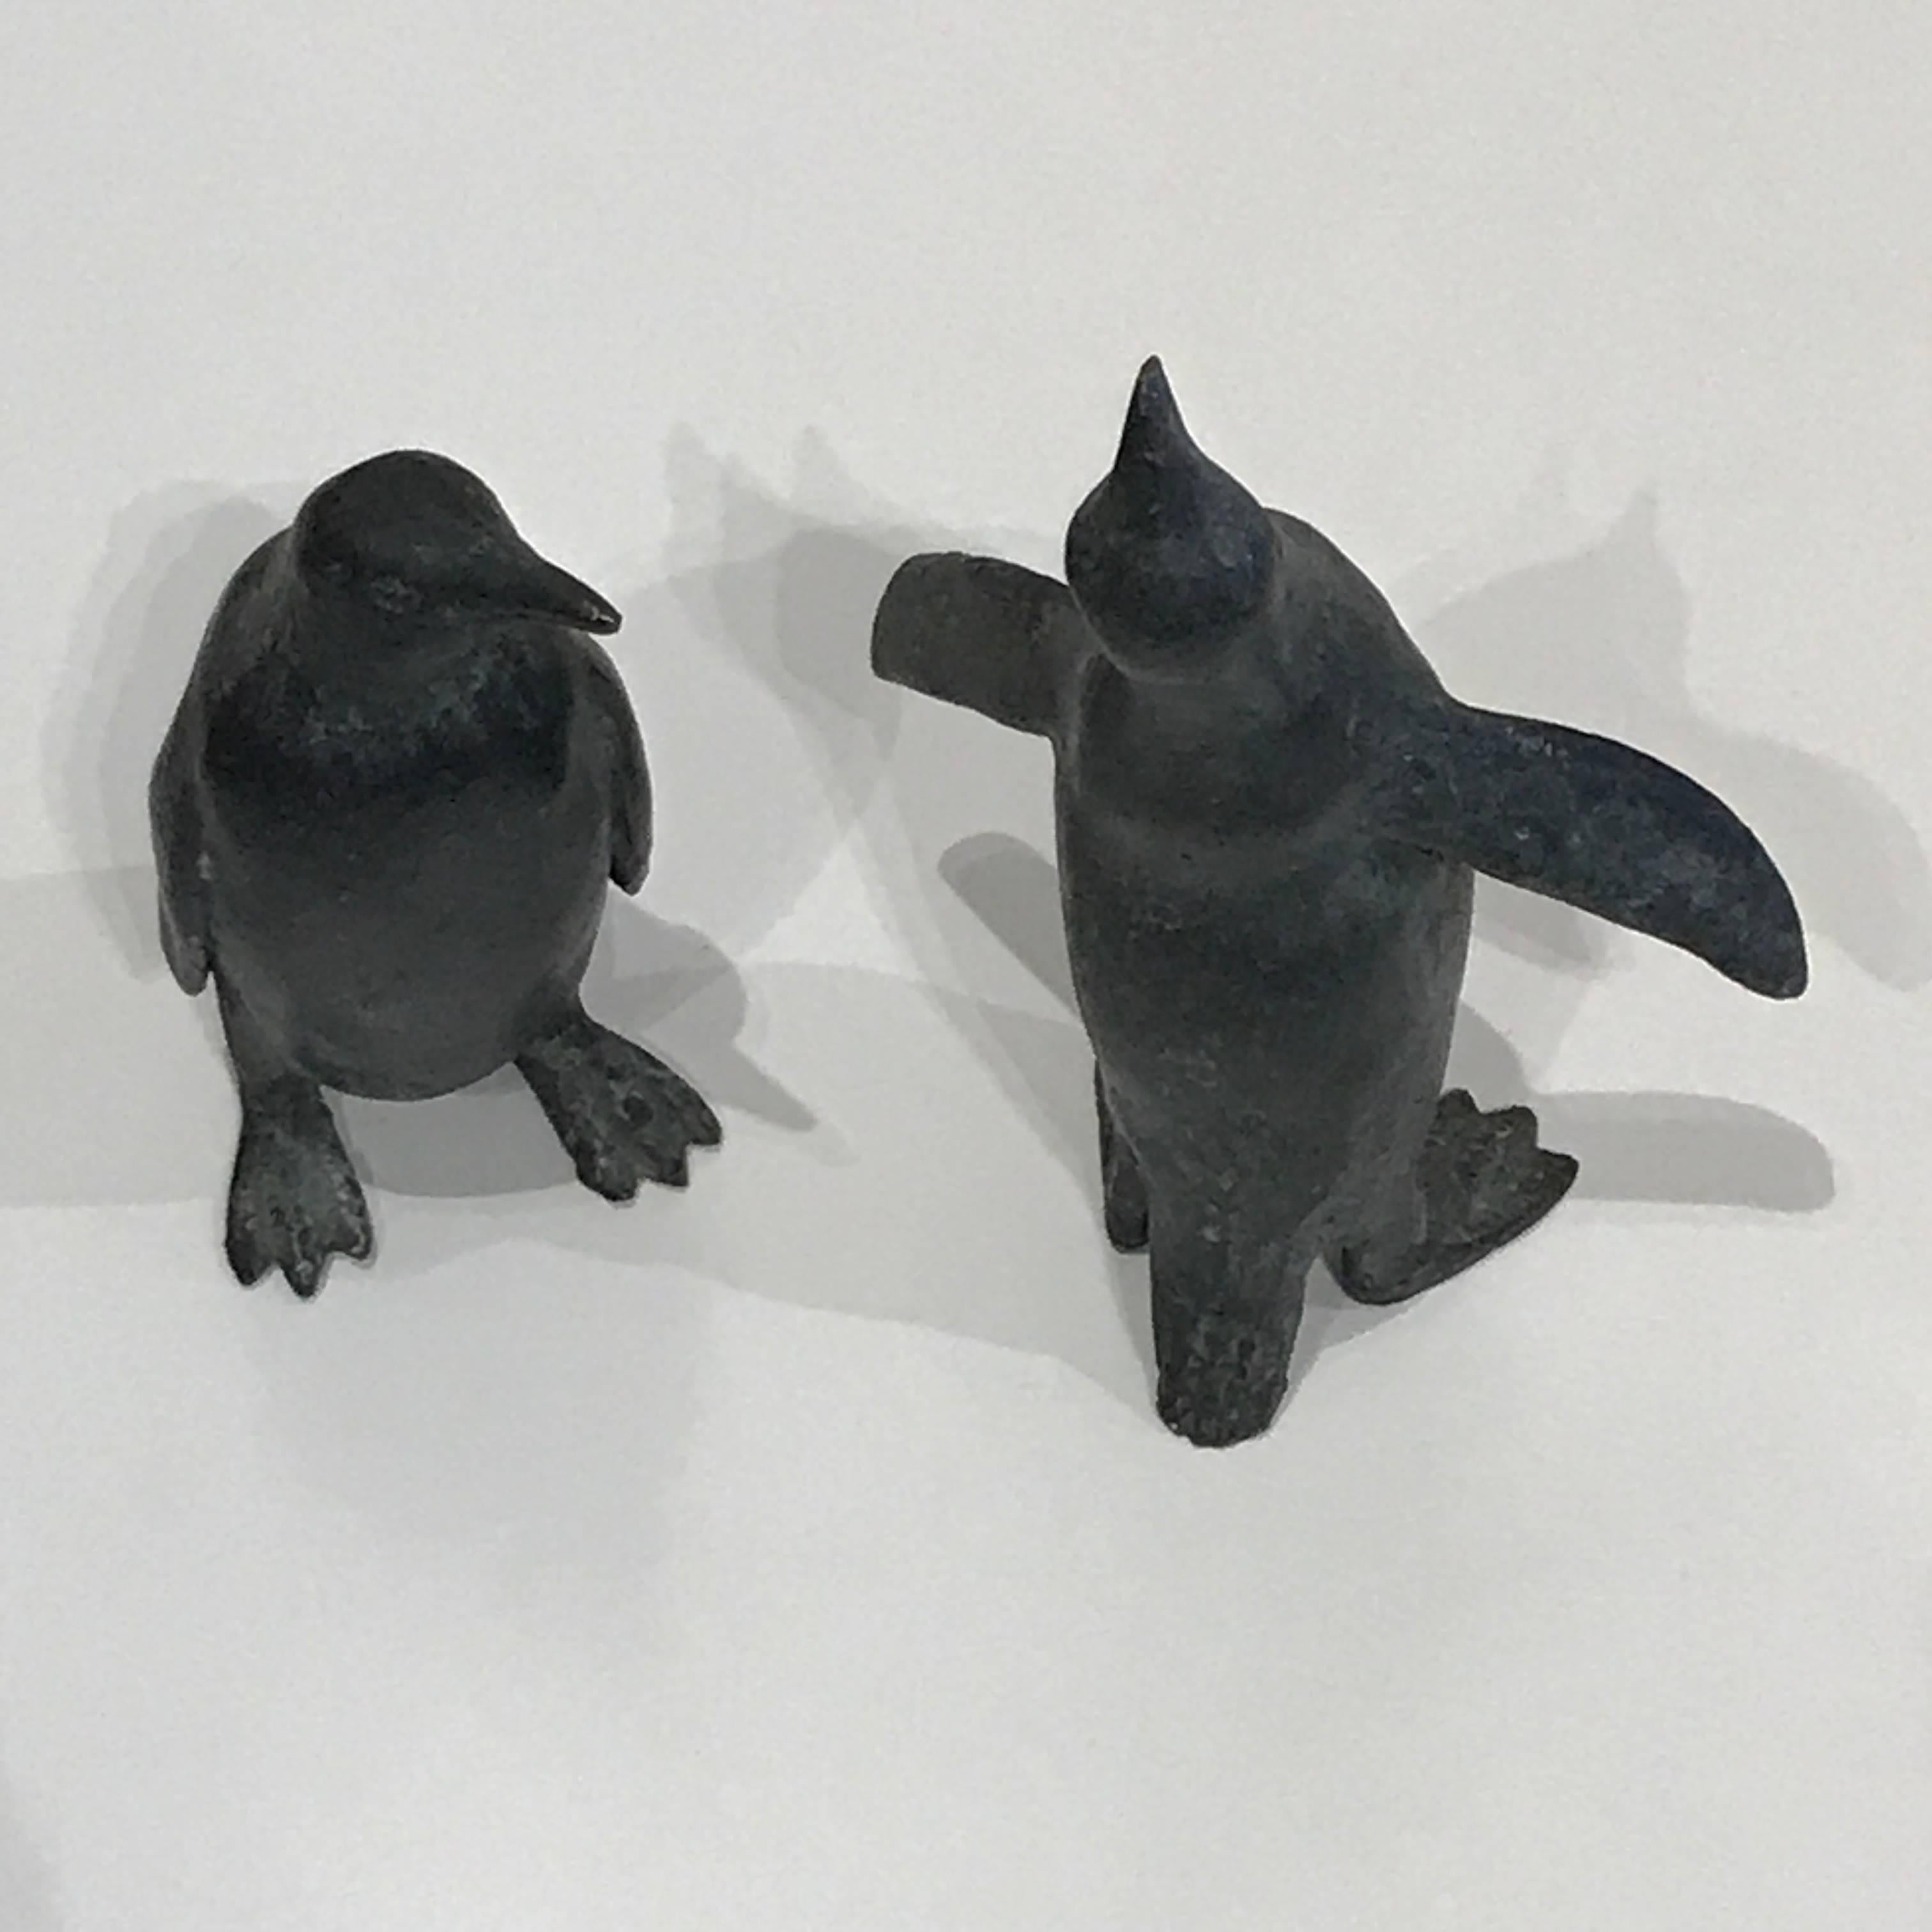 Pair of cast solid bronze expressive penguins, having a very dark patina from age, both are numbered 2/25 at the base of the tail. The sizes are 5.50